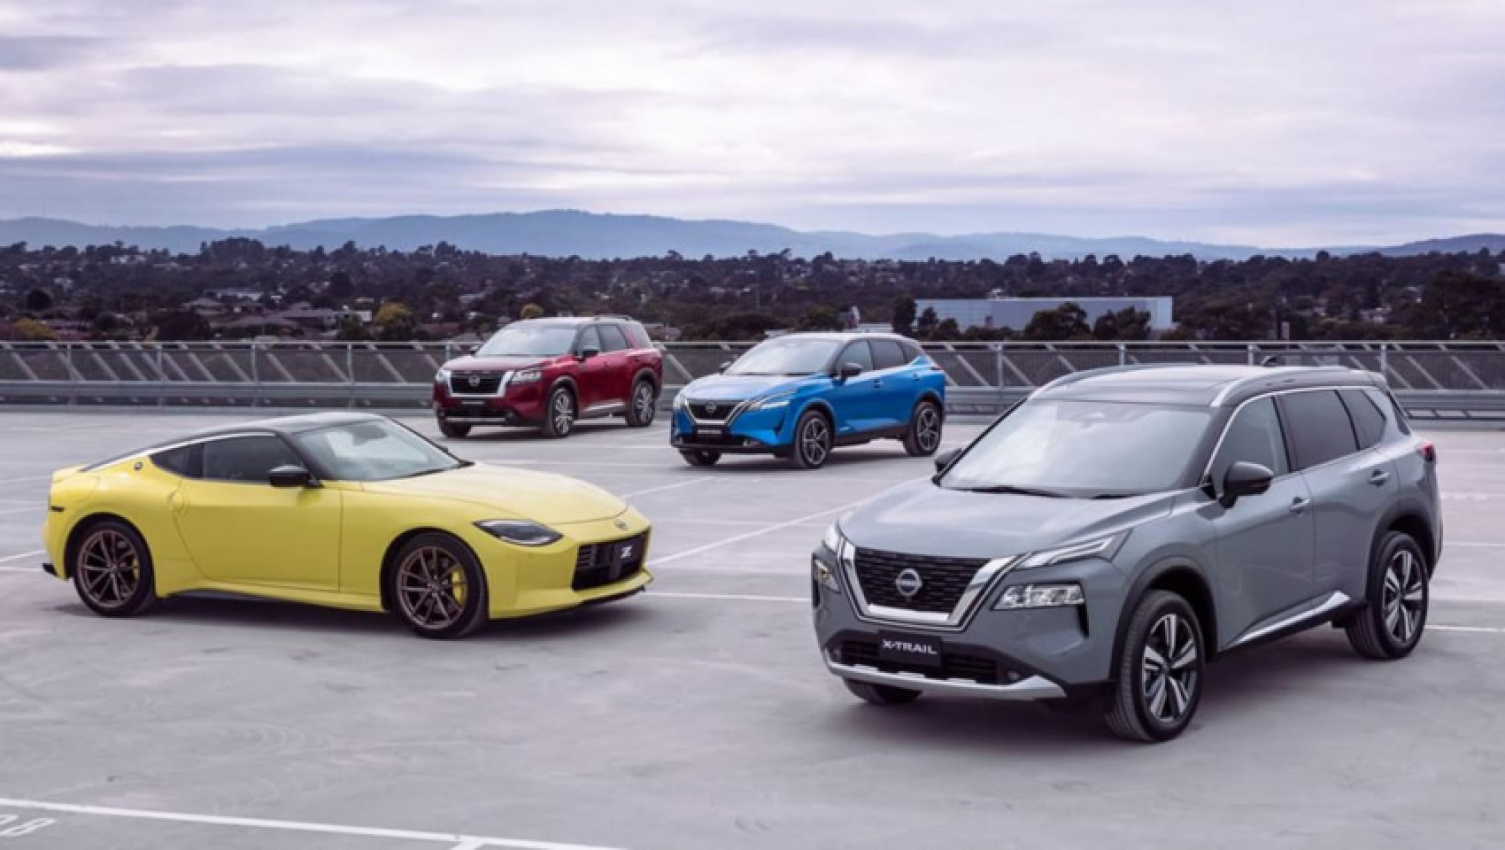 autos, cars, nissan, 7 seater, family cars, green cars, hybrid cars, industry news, nissan coupe range, nissan news, nissan pathfinder, nissan pathfinder 2022, nissan qashqai, nissan qashqai 2022, nissan suv range, nissan x-trail, nissan x-trail 2022, nissan z, nissan z 2022, showroom news, sports cars, 2022 nissan qashqai, x-trail, pathfinder and z set to boost australian sales this year, but when will these critical new models arrive in showrooms?